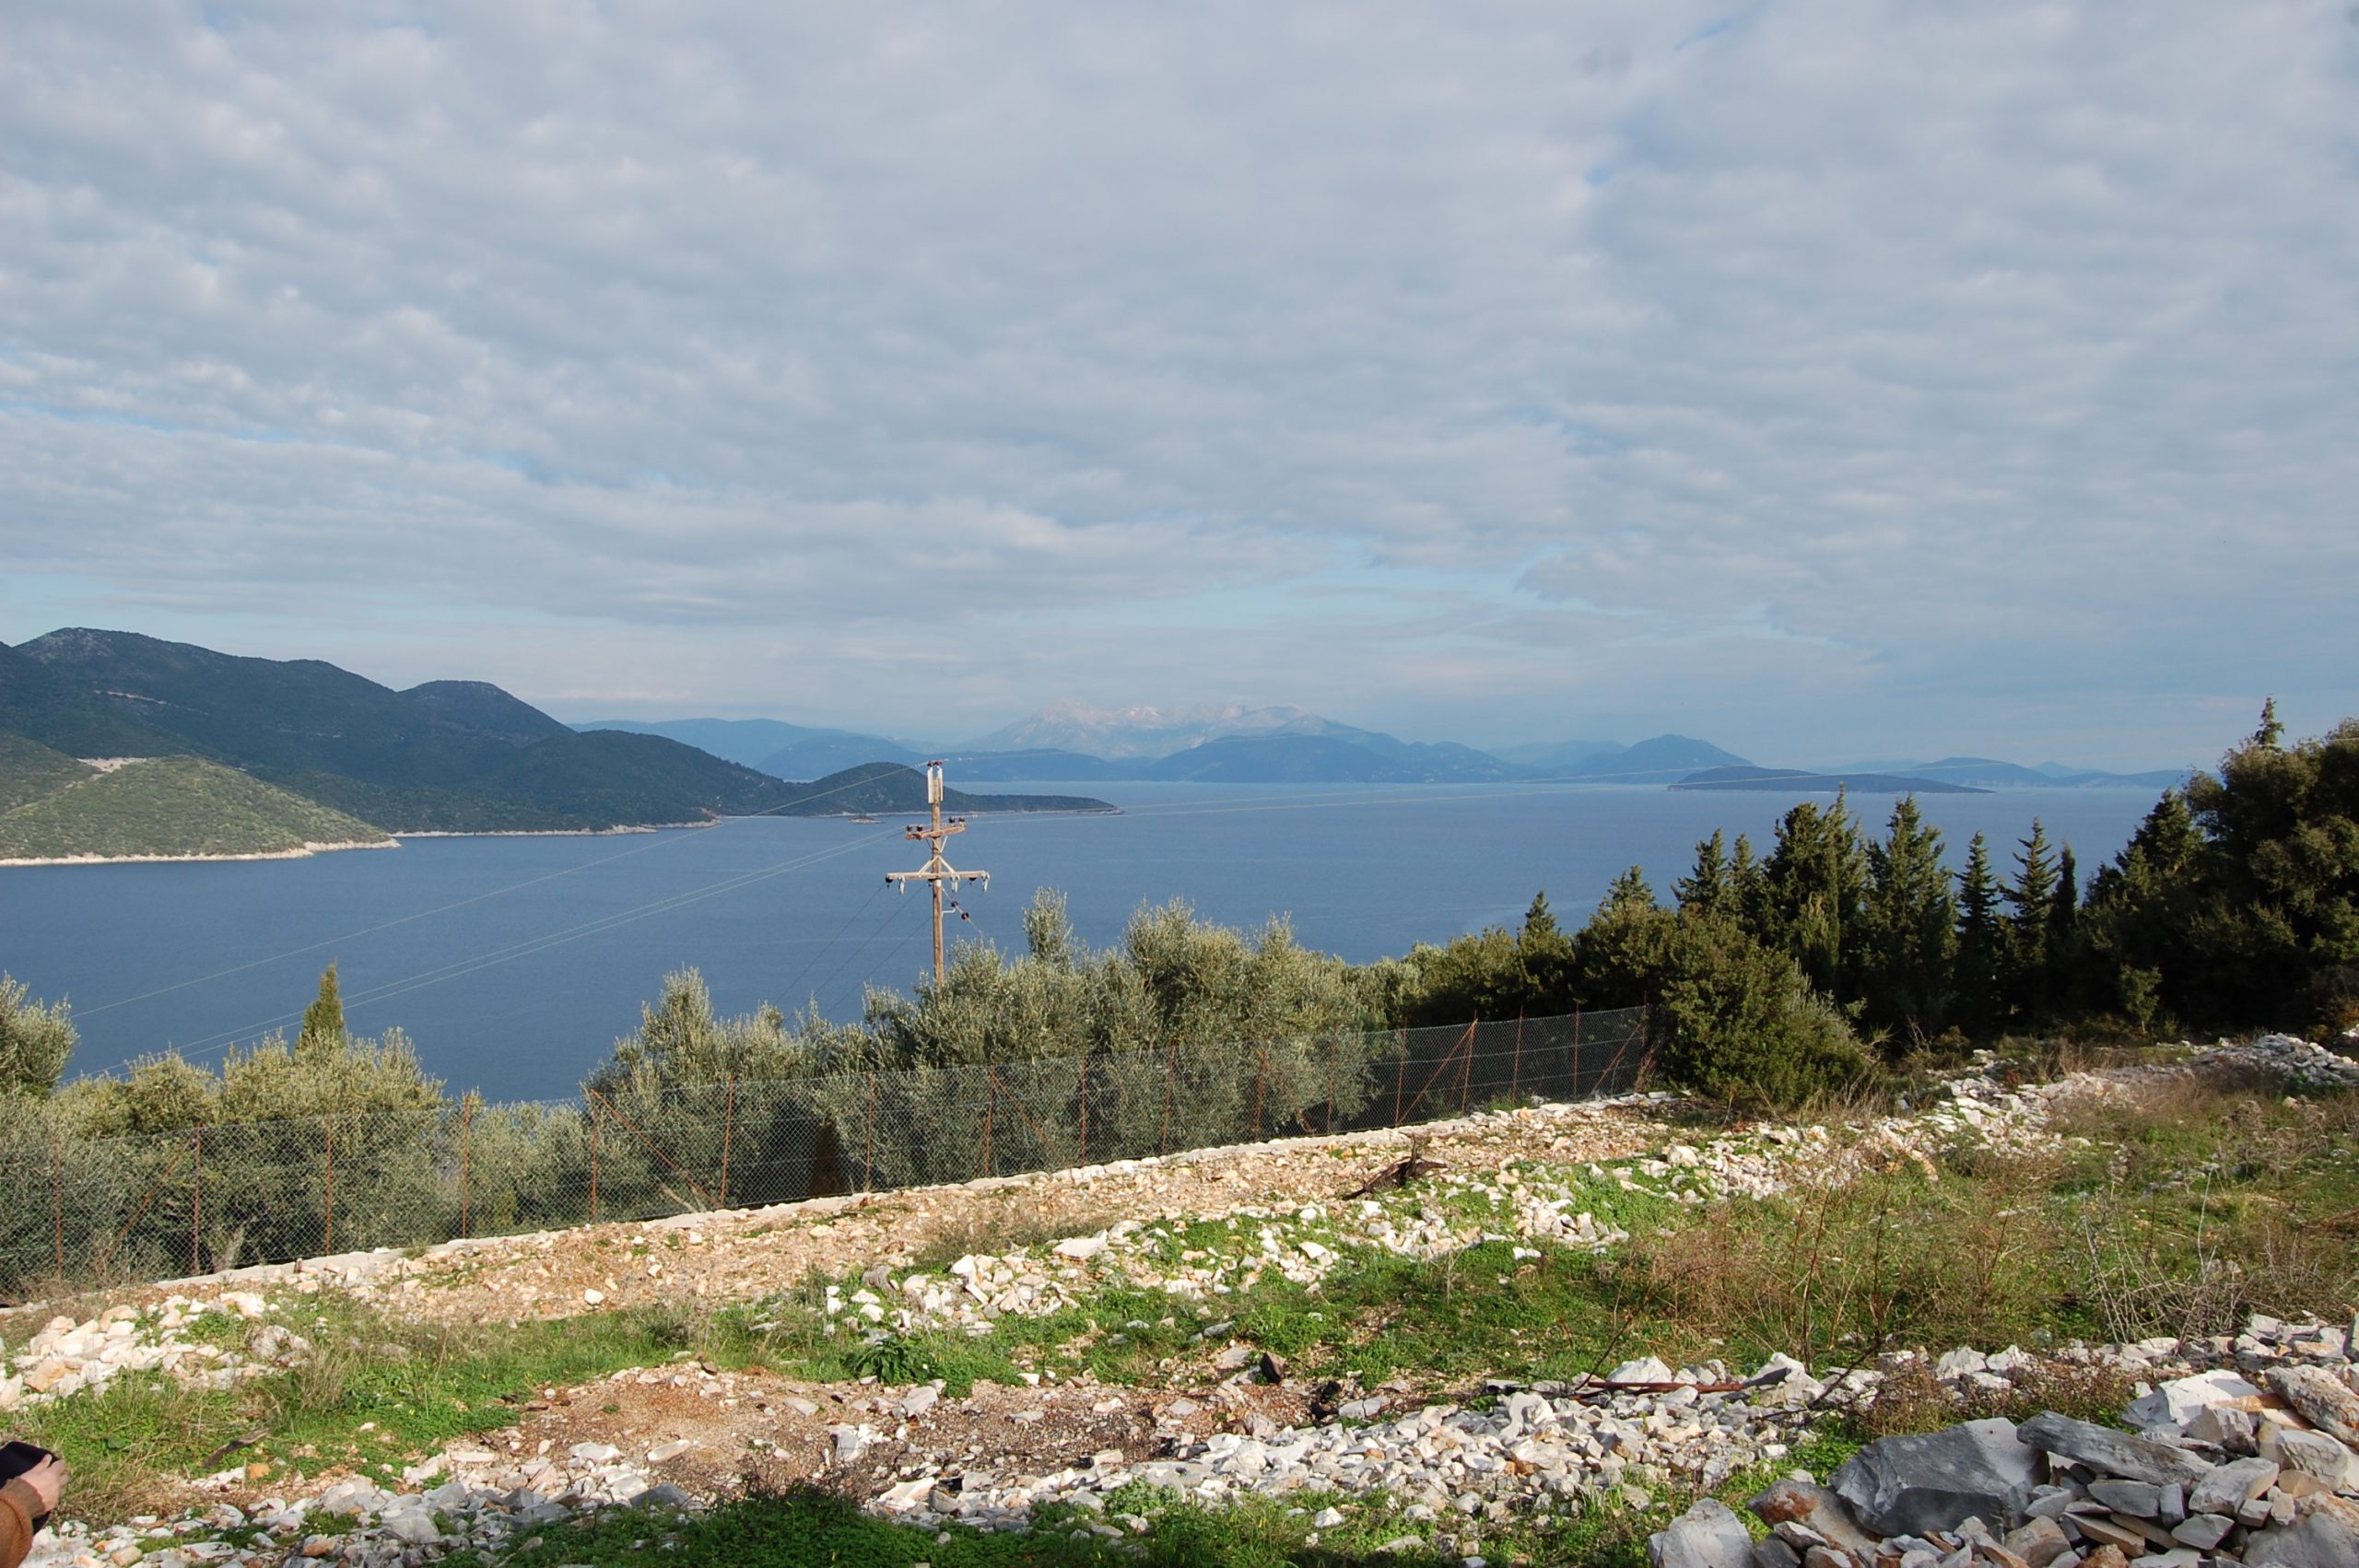 Sold land in Ithaca Greece